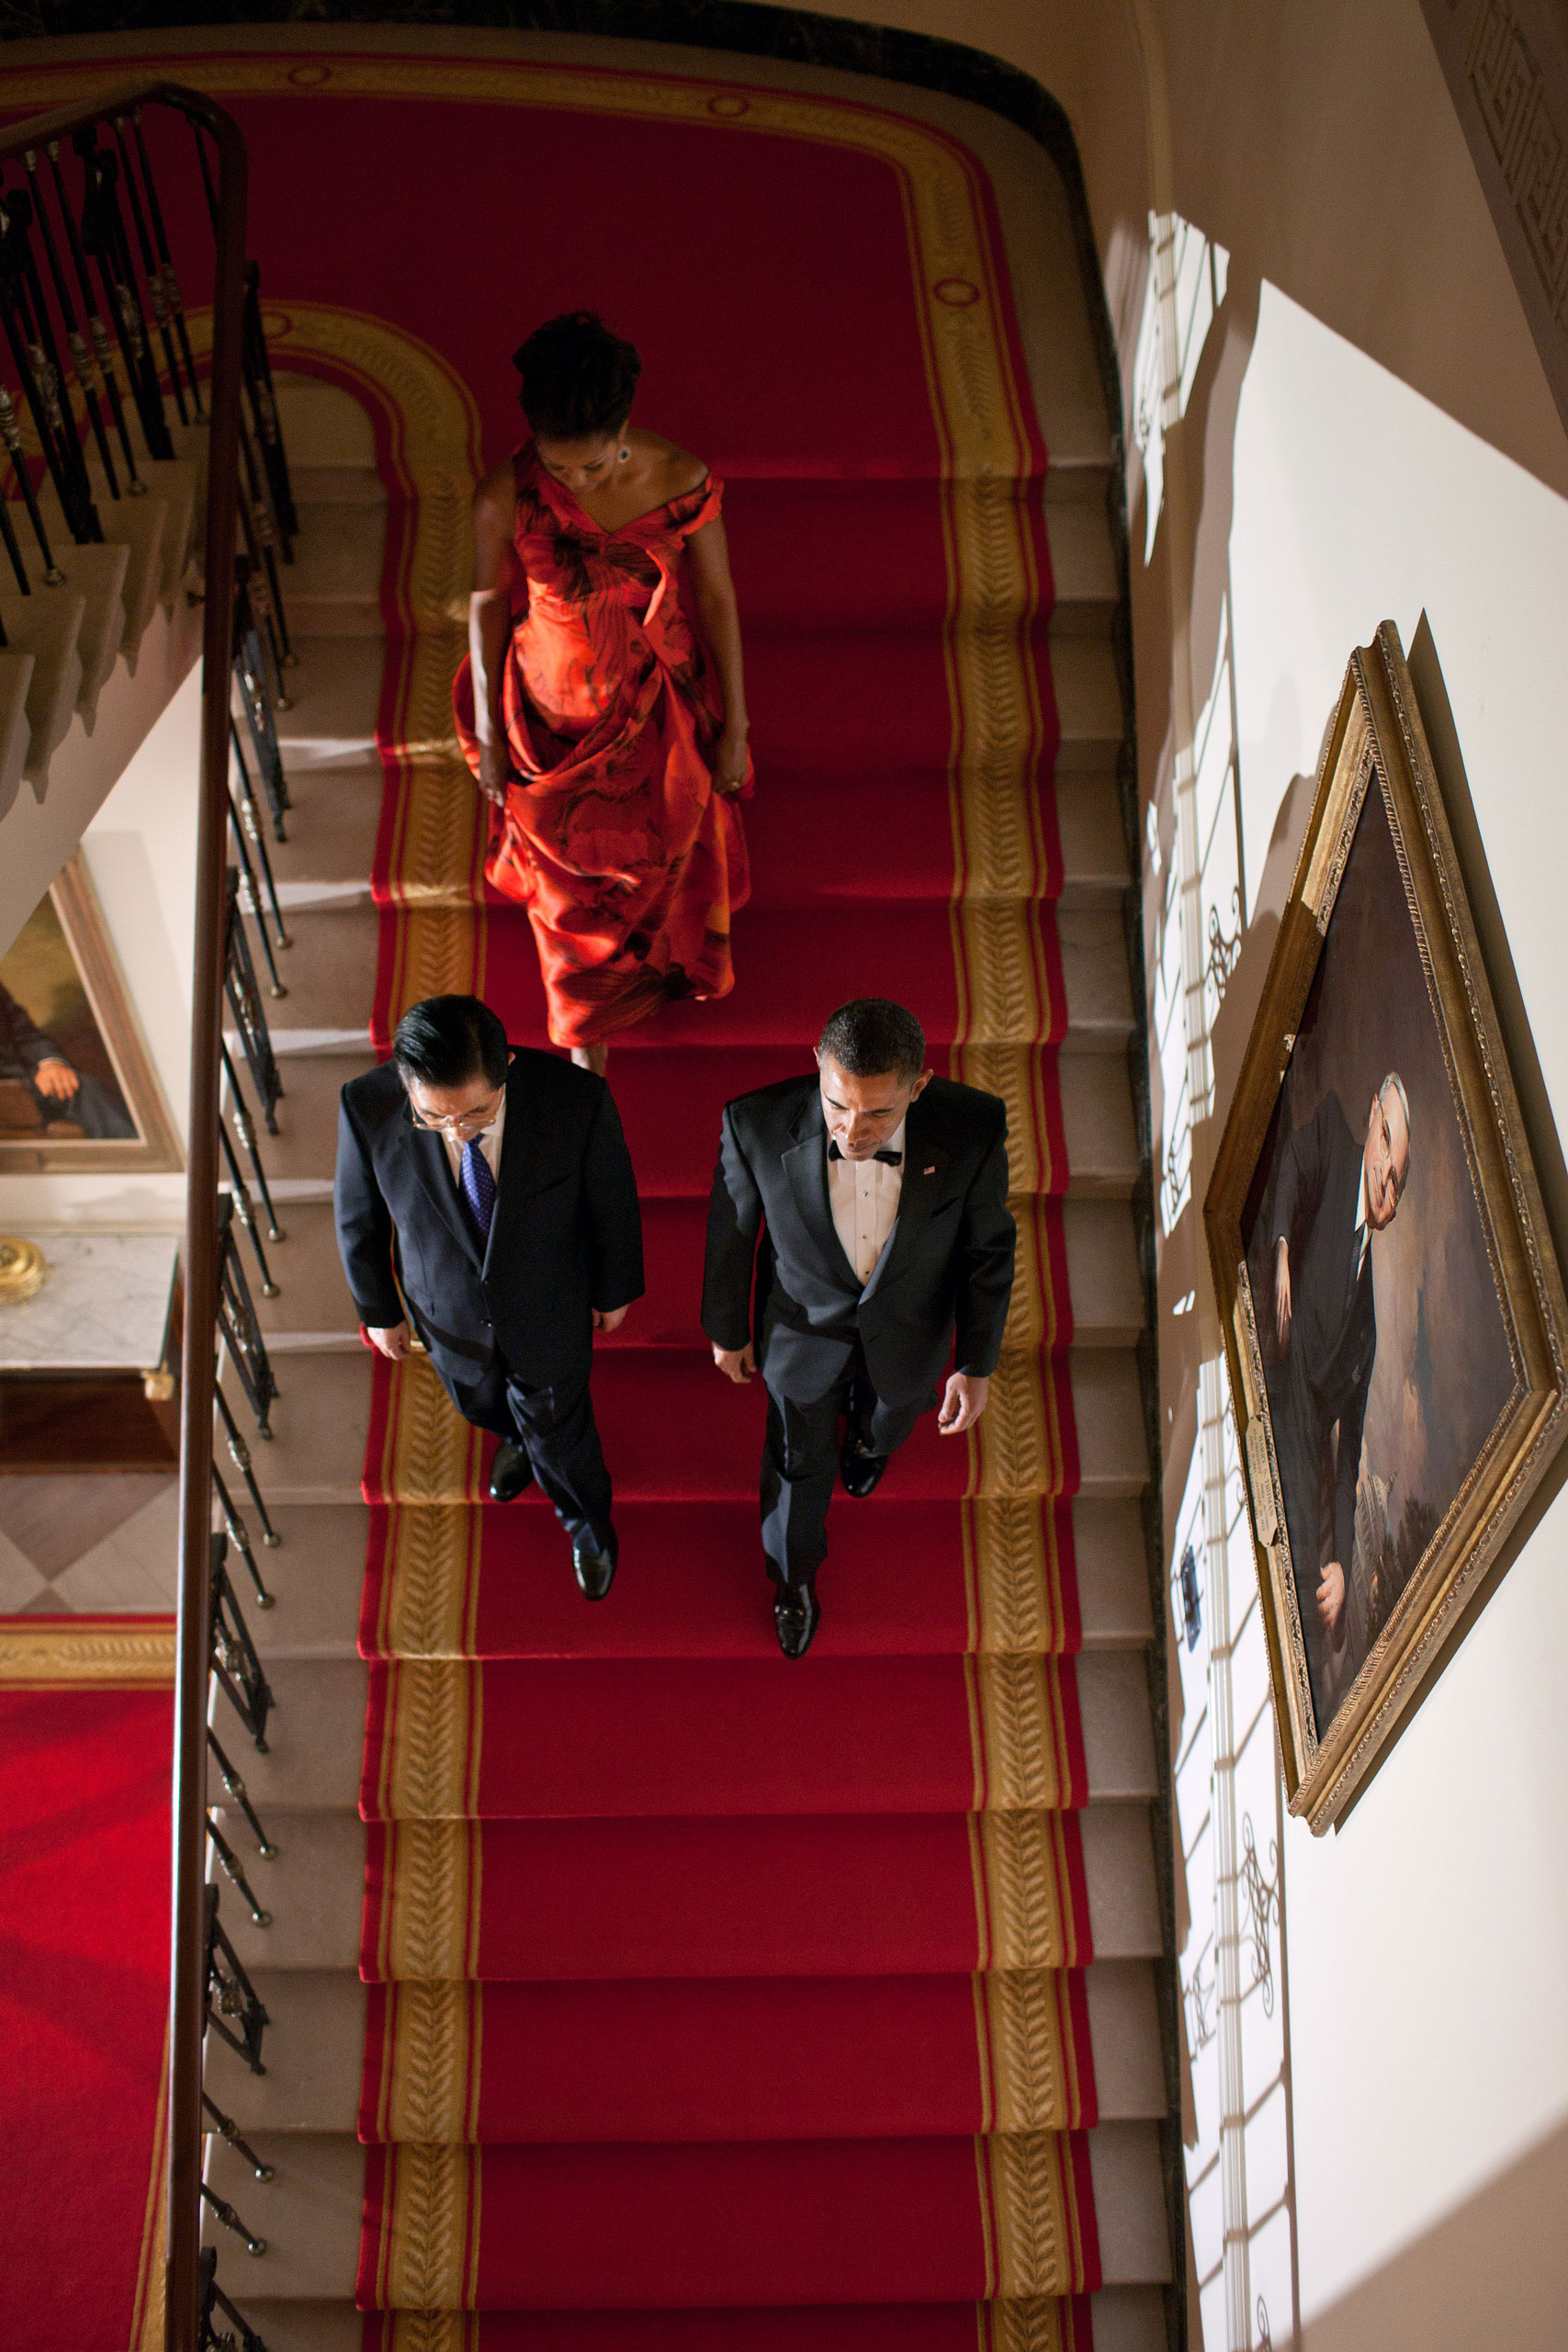 The President, the First Lady and President Hu Jintao of China descend the Grand Staircase of the White House before a formal State Dinner, Jan. 19, 2011.